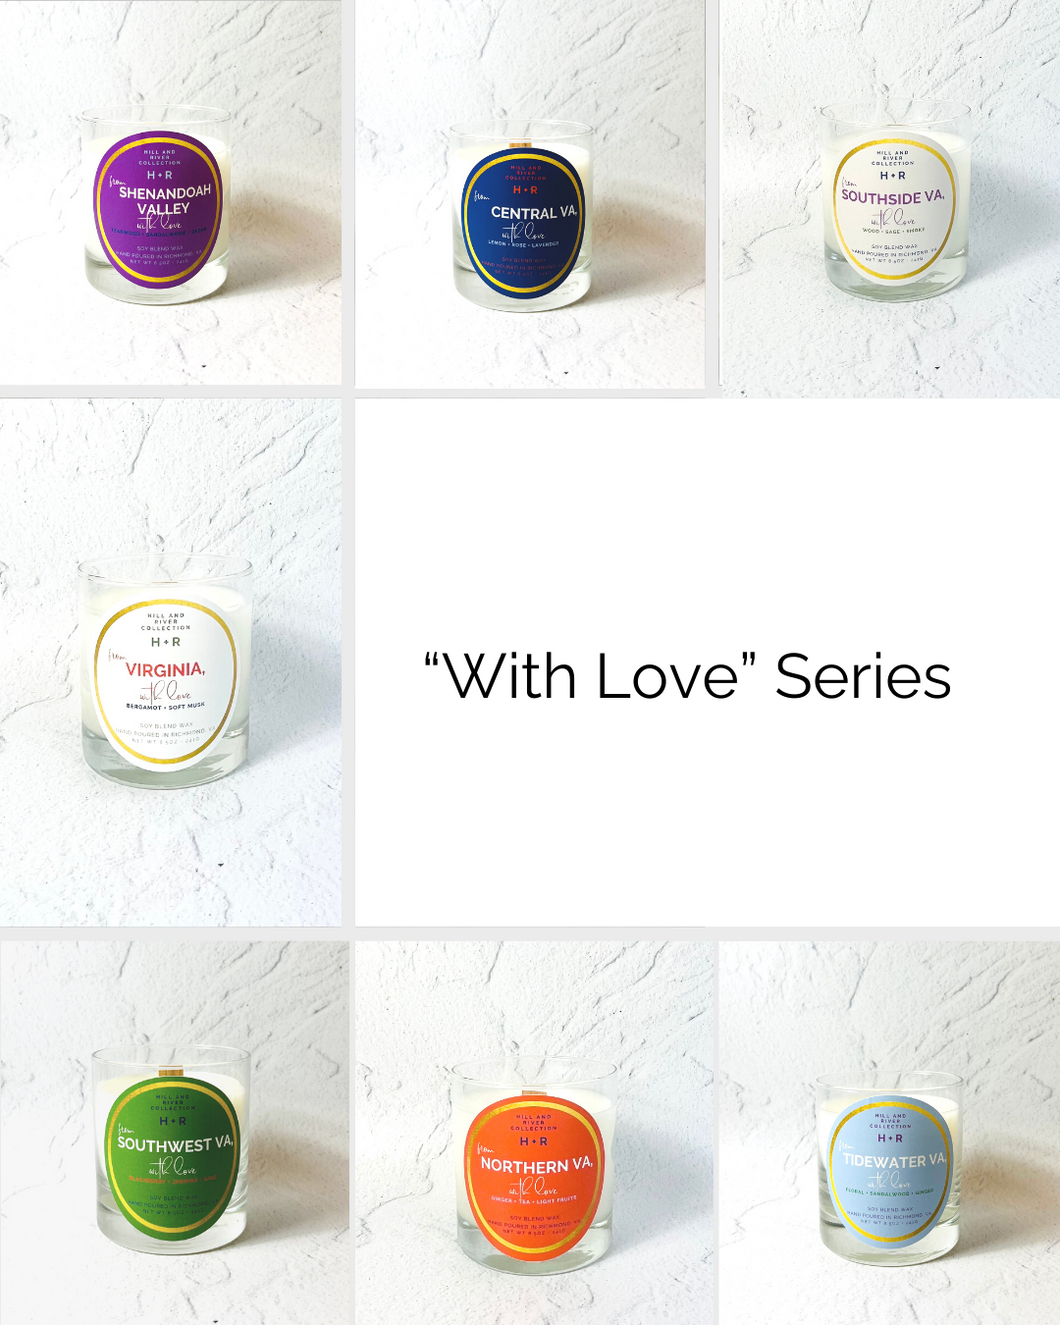 With Love Series